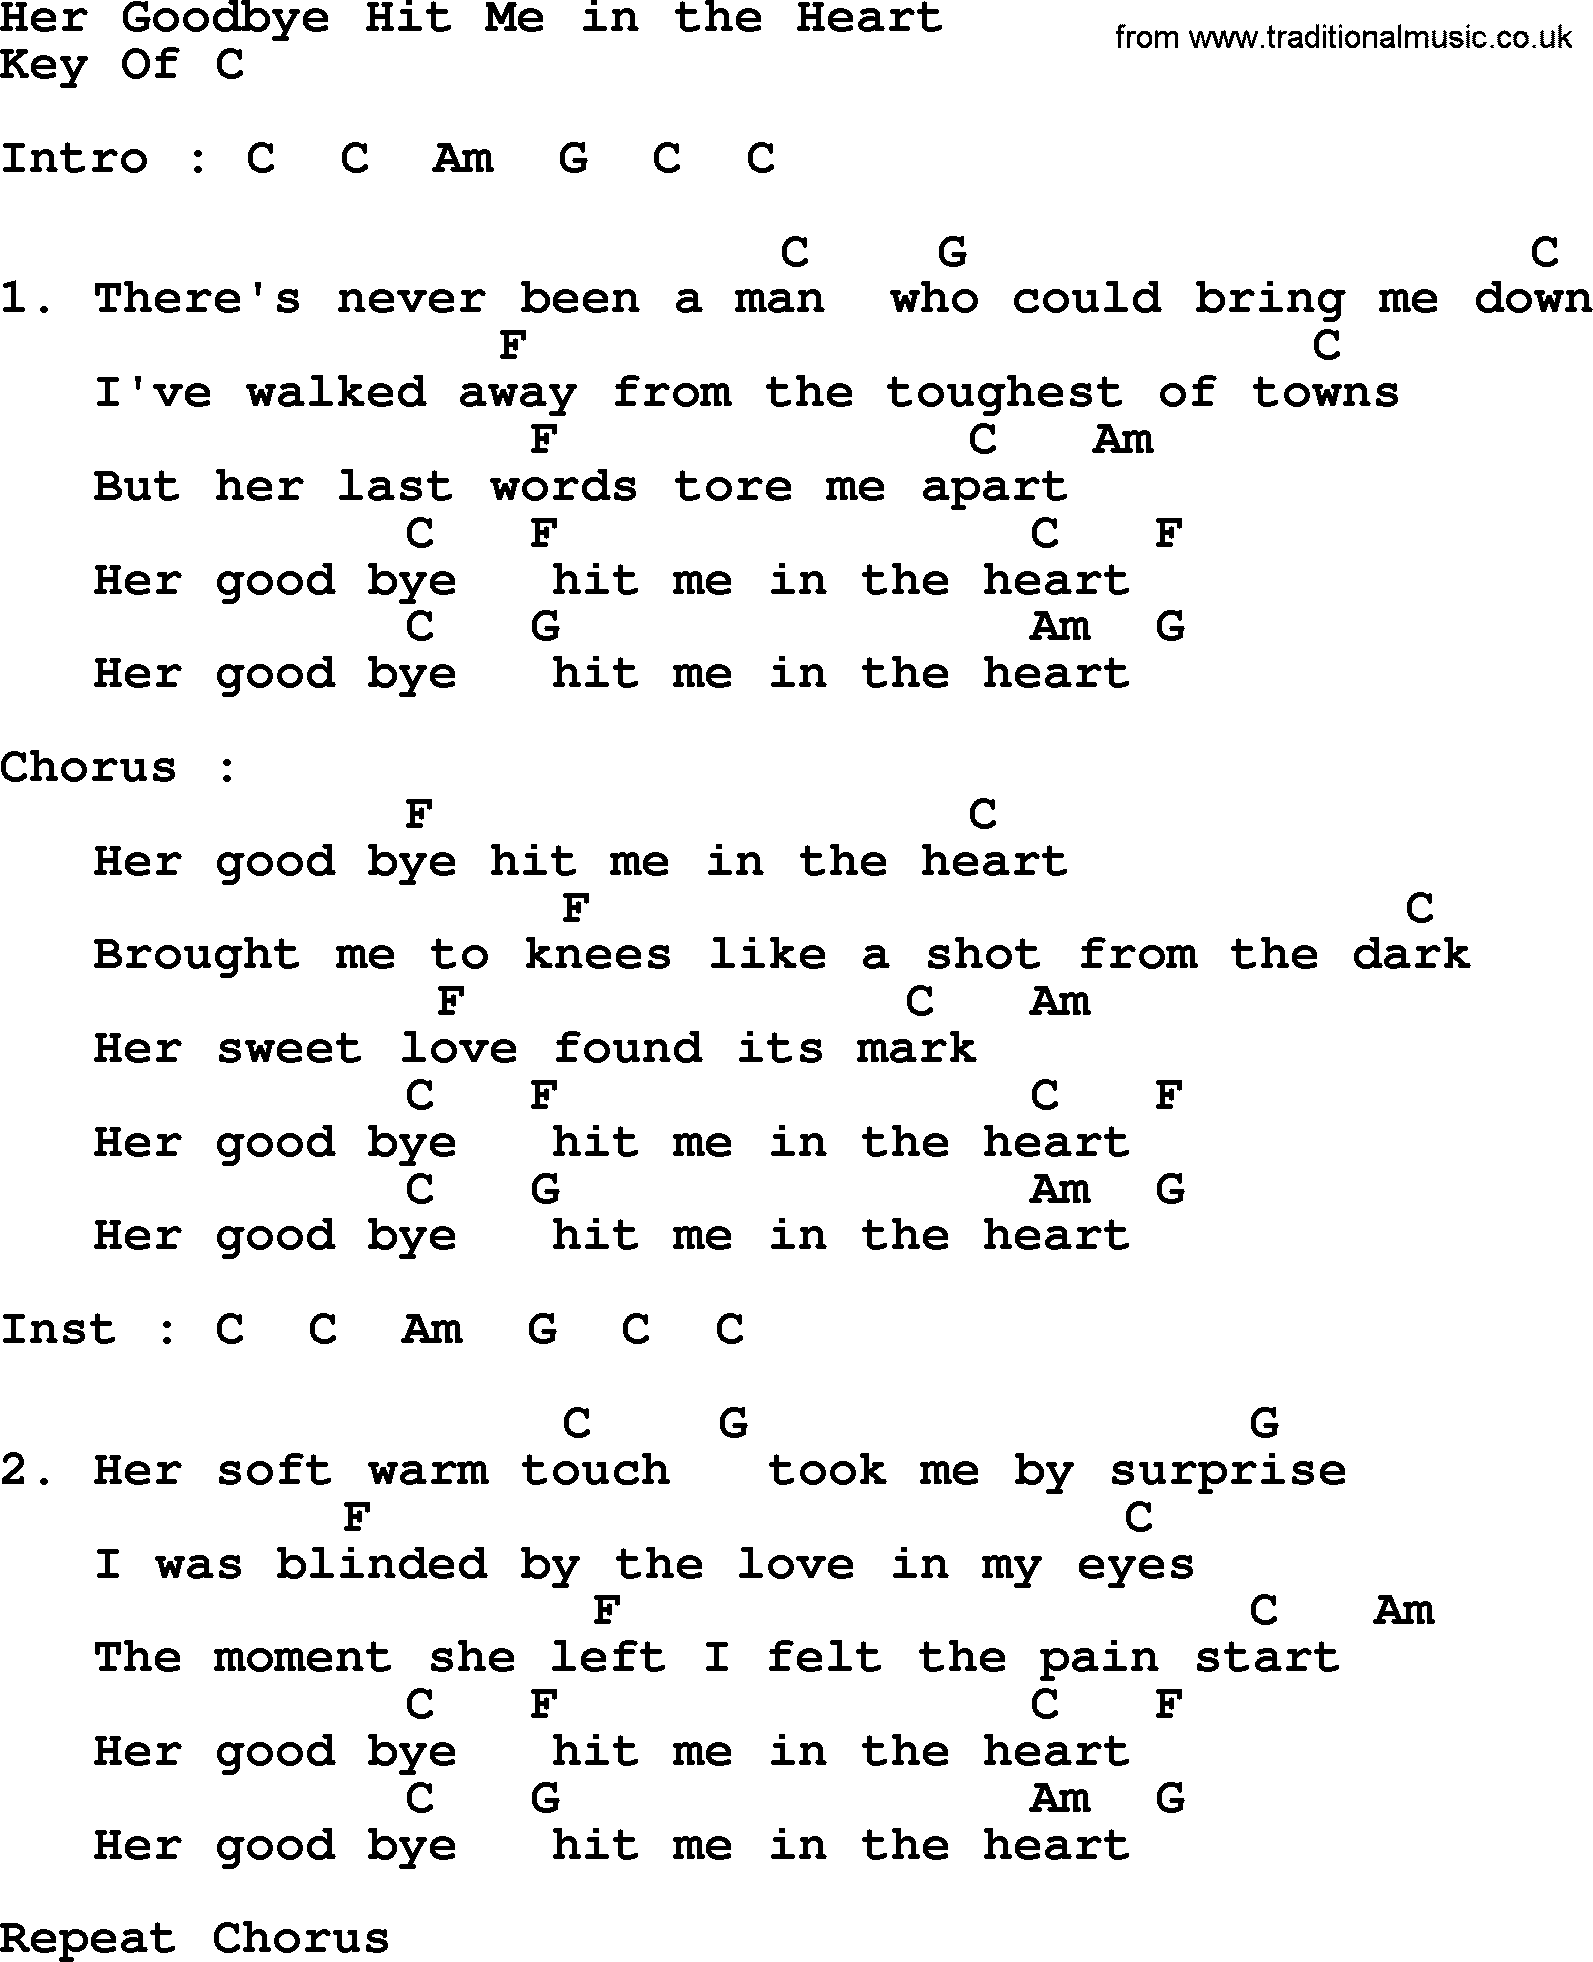 George Strait song: Her Goodbye Hit Me in the Heart, lyrics and chords